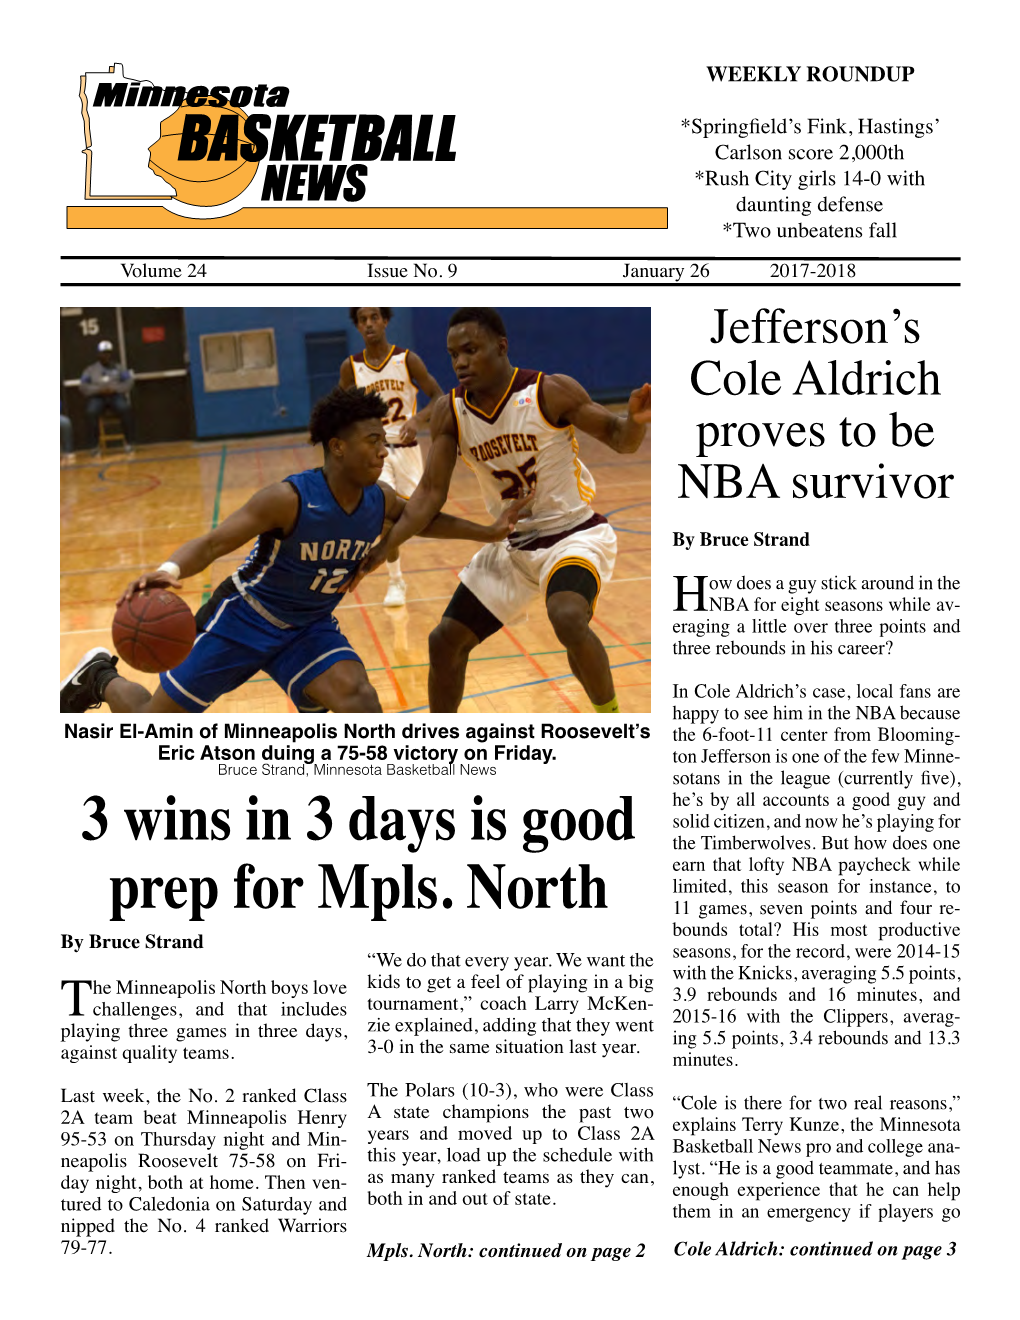 3 Wins in 3 Days Is Good Prep for Mpls. North